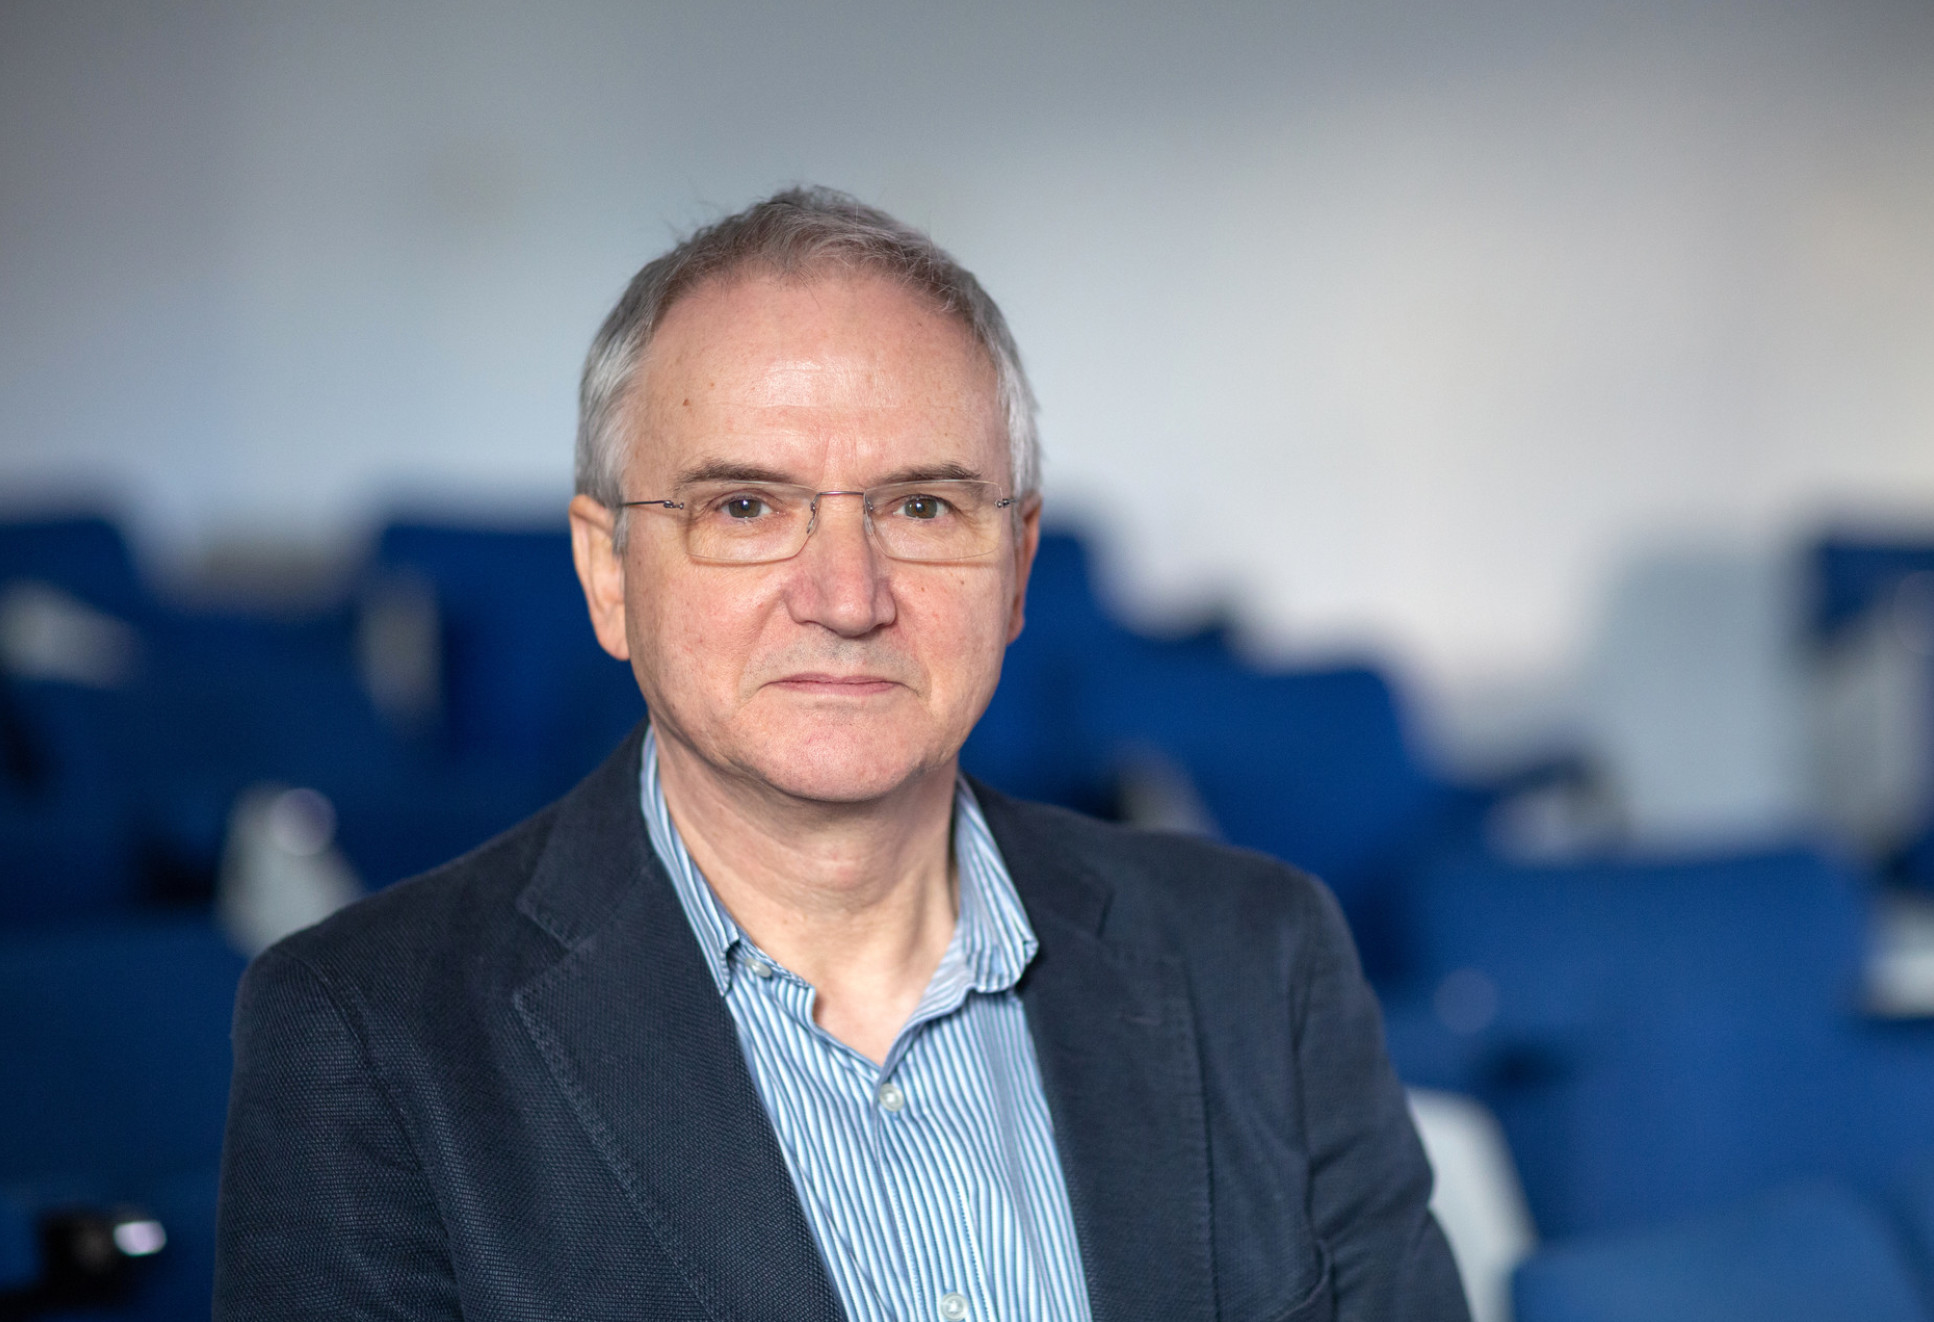 Professor Peter Openshaw, of Imperial's National Heart & Lung Institute, in 2018